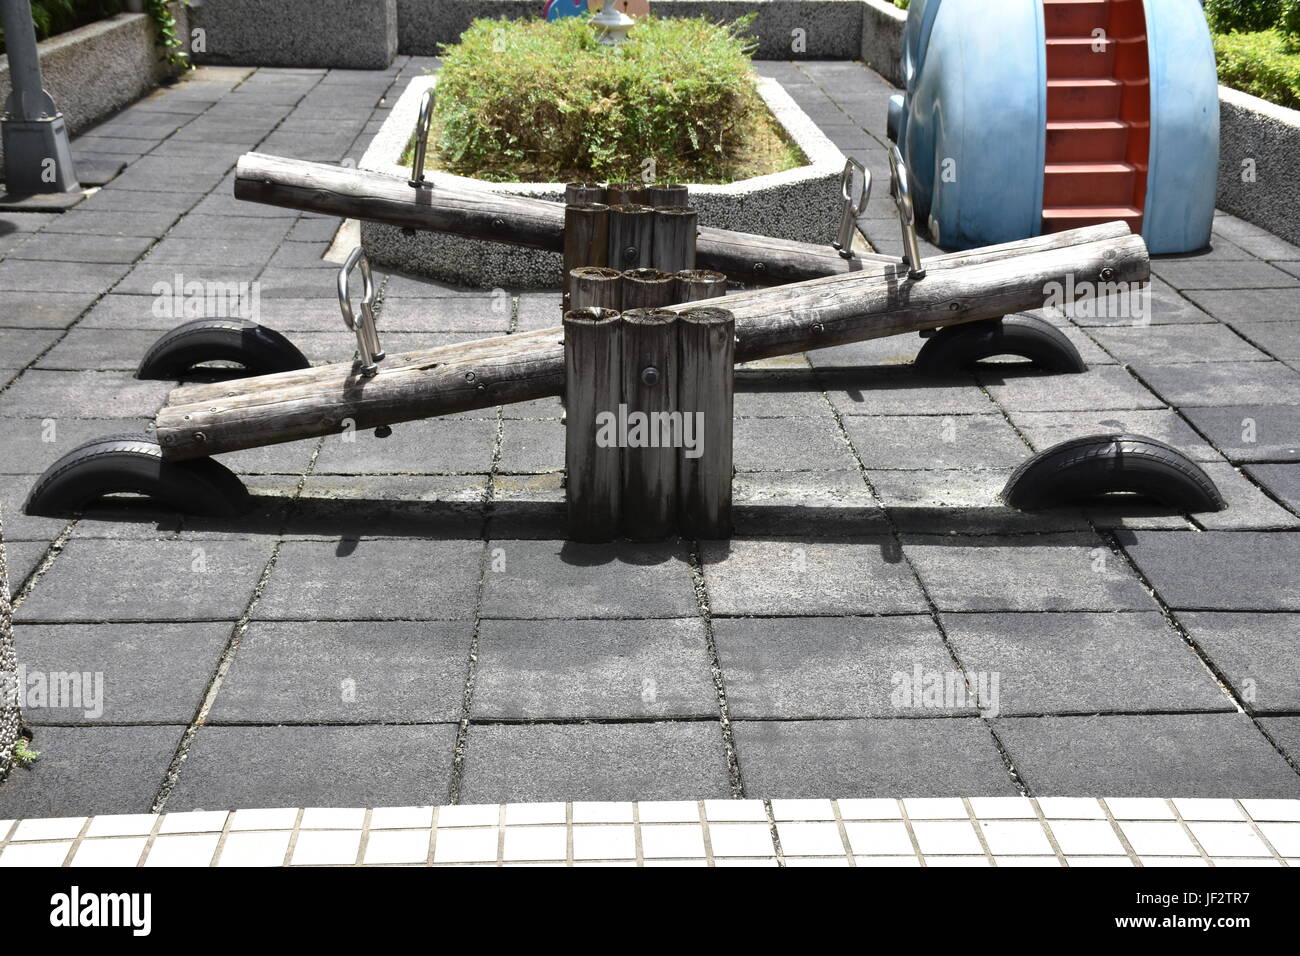 Children's see saw made from logs, in playground garden area. Stock Photo